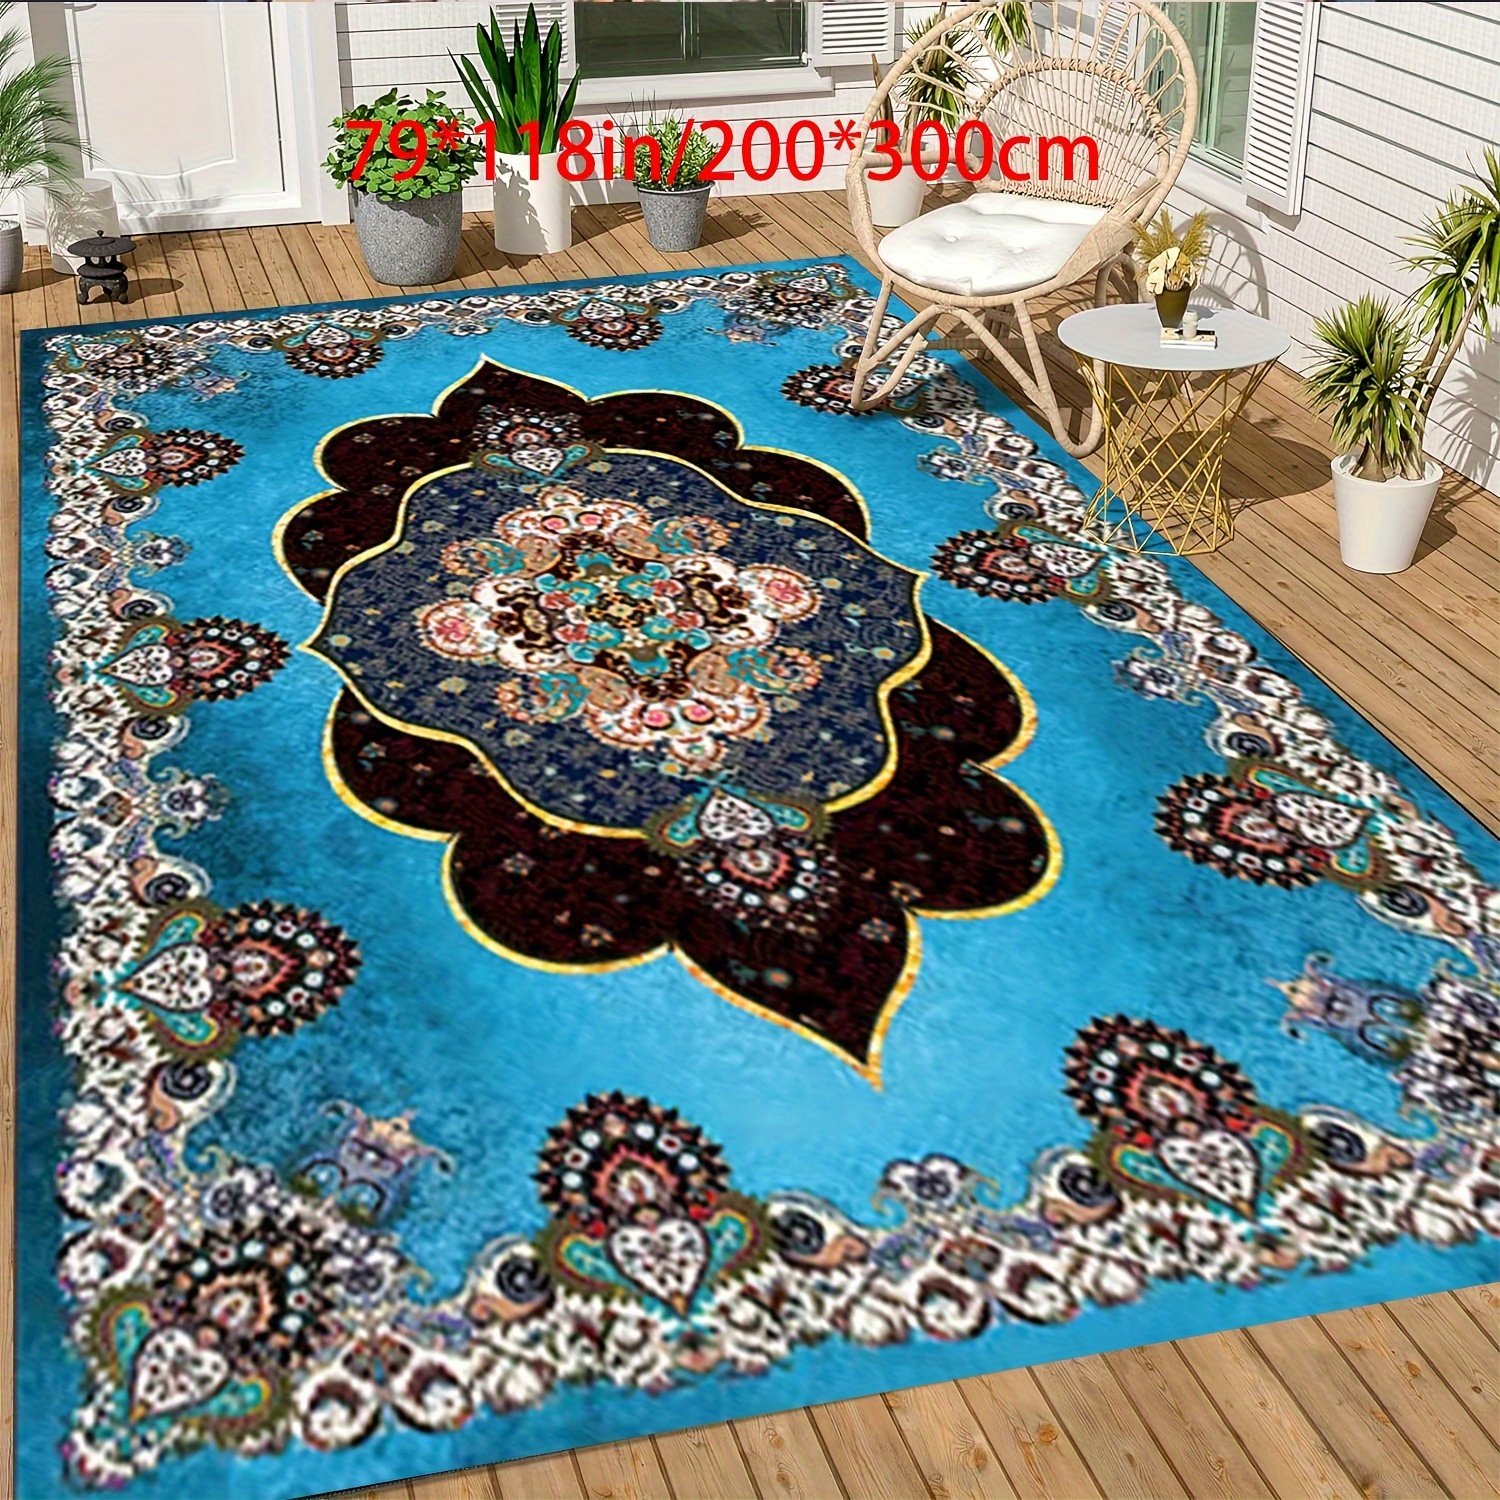 

1pc, Carpet, Modern Retro Style Decorative Outdoor Carpet With Imitation Cashmere, Square Non-slip European Blue Bottom Pattern Carpet, Thickened Carpet, Suitable For Living Room, Bedroom